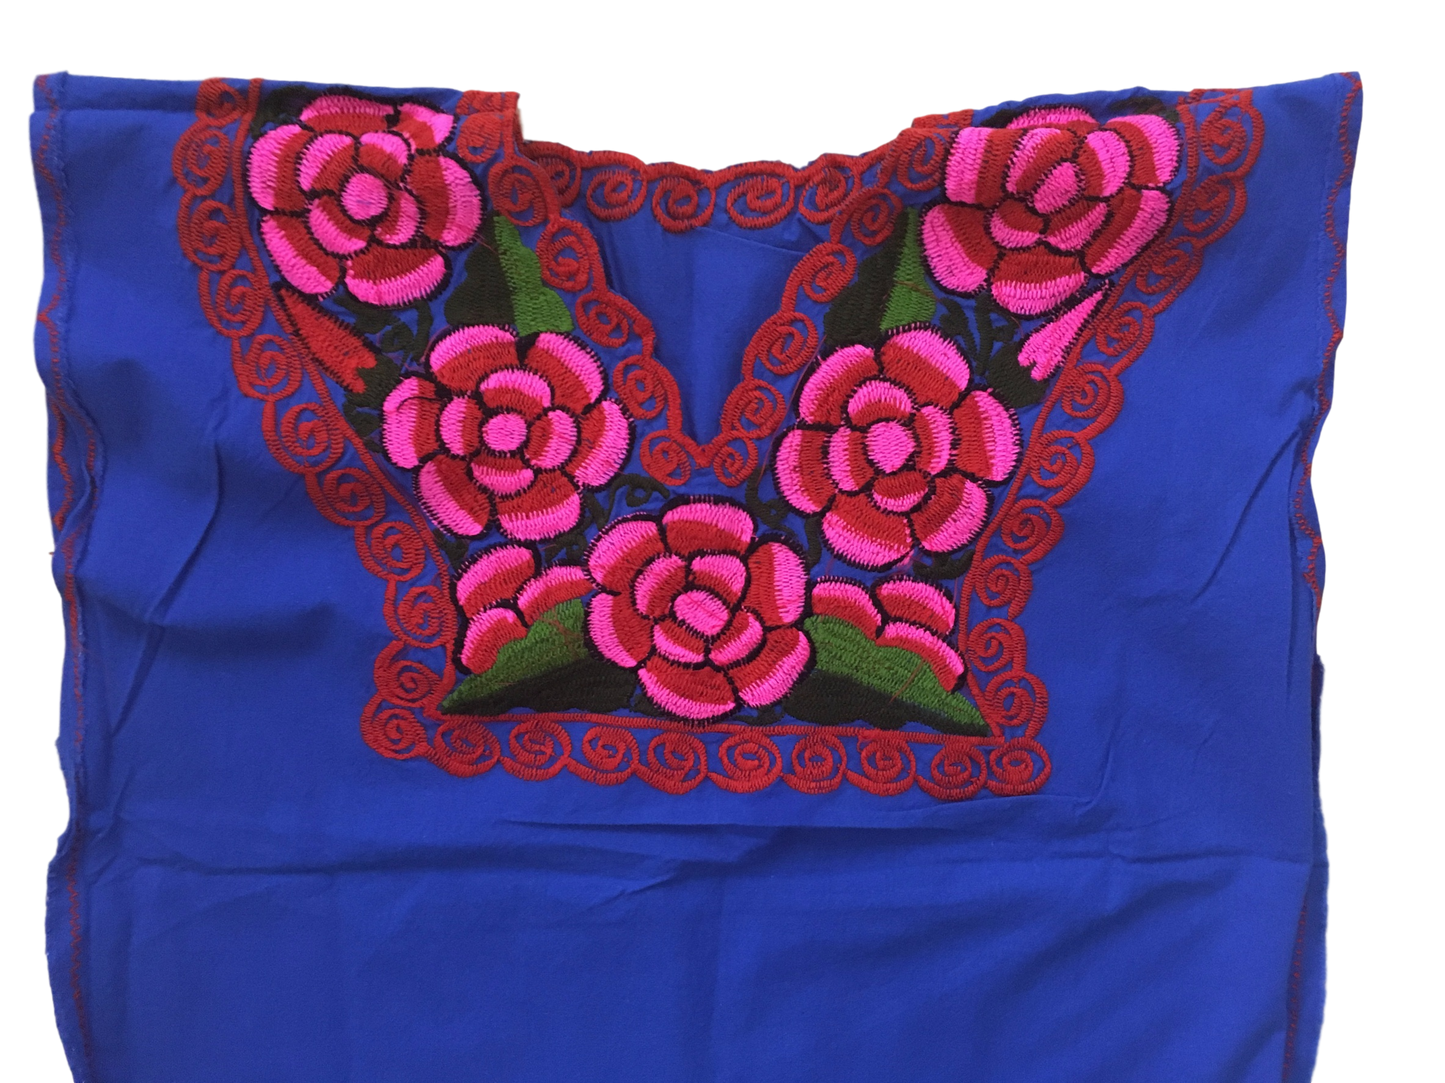 Blue Mexican Blouse with Flowers